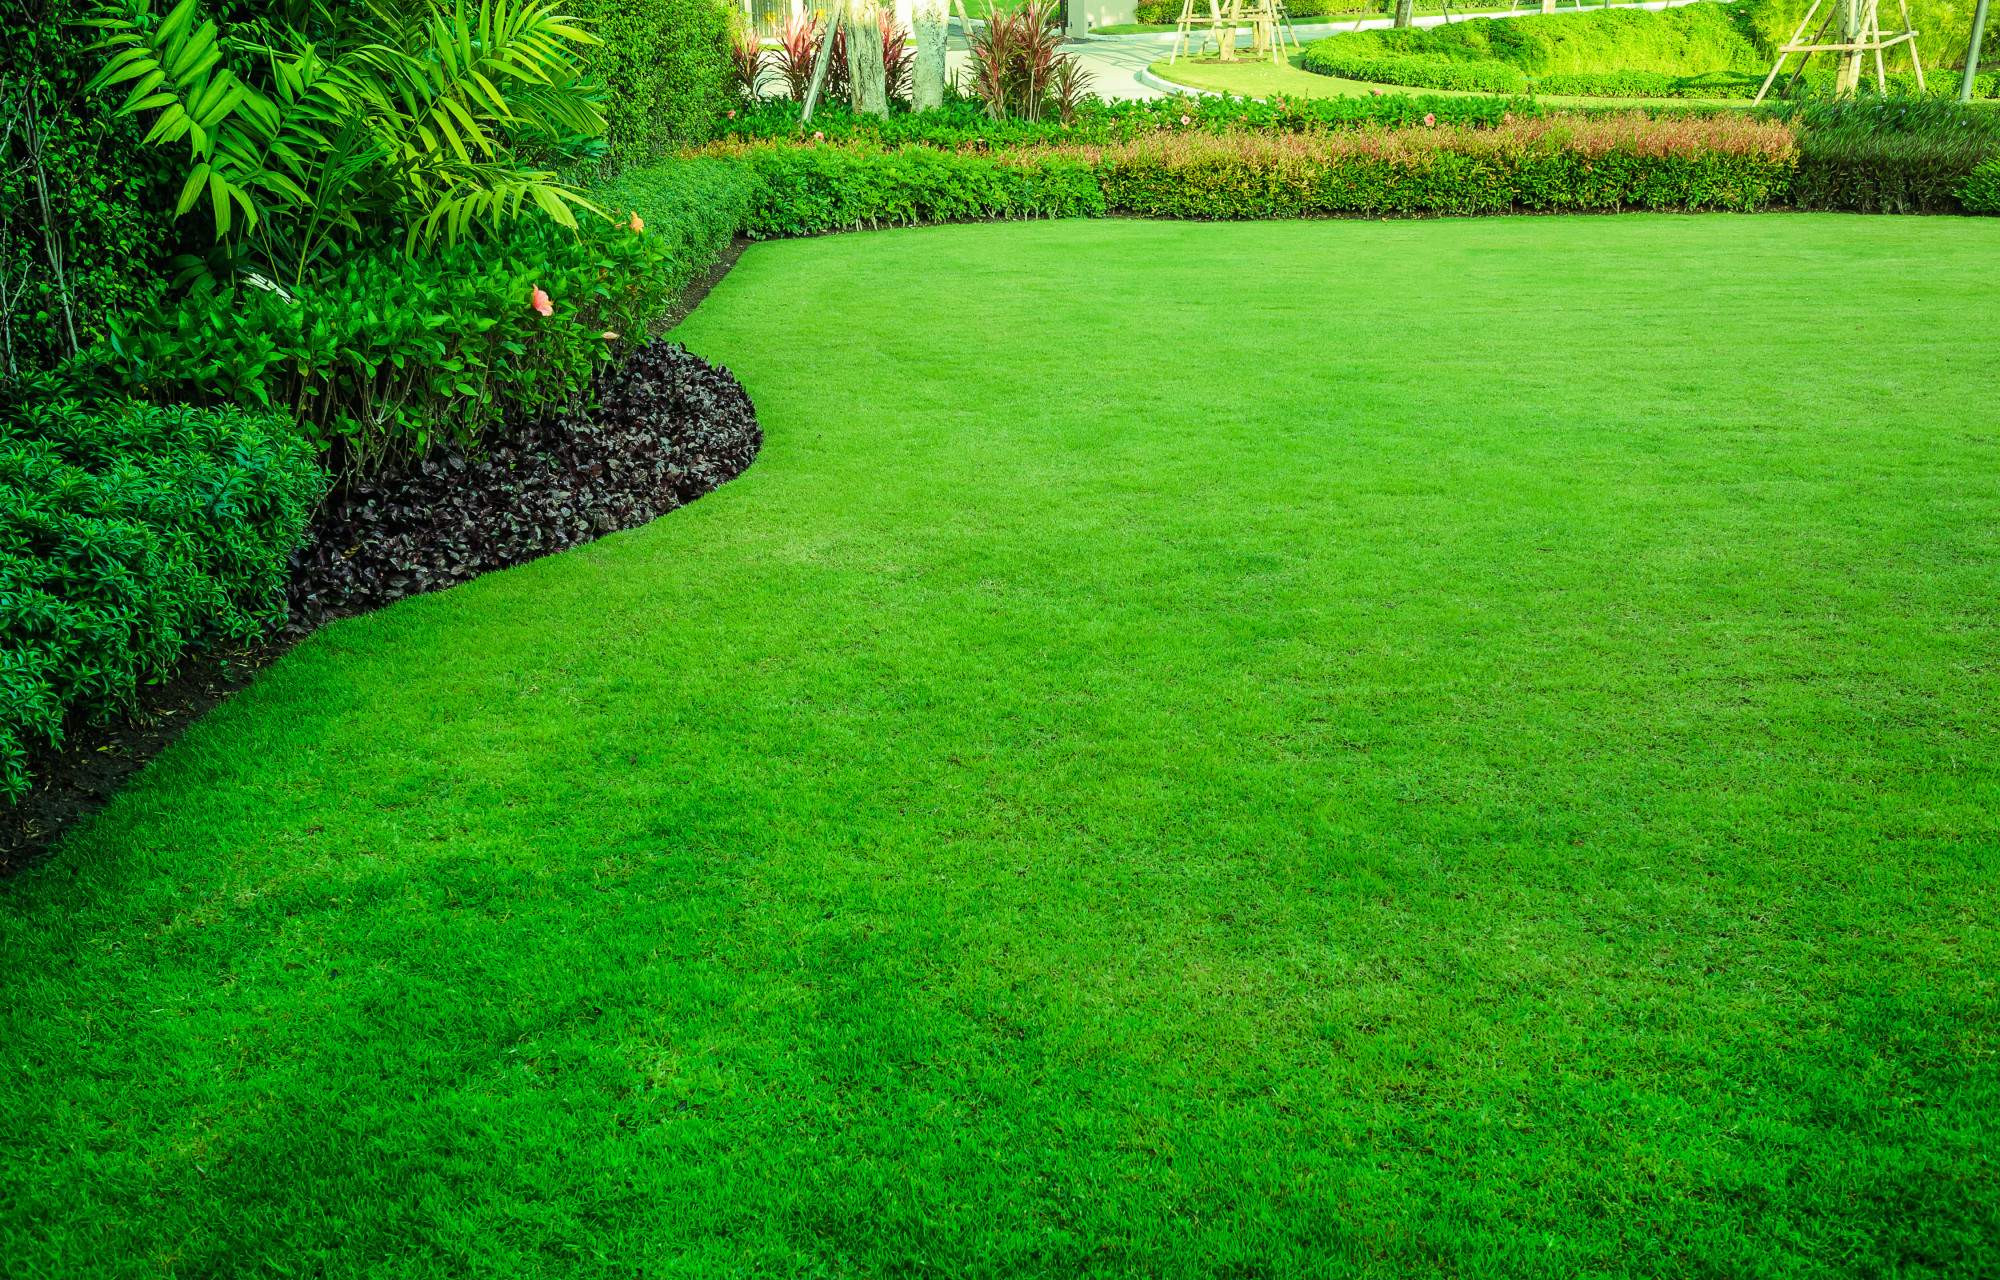 5 Great Ideas for Appealing Lawn Decor